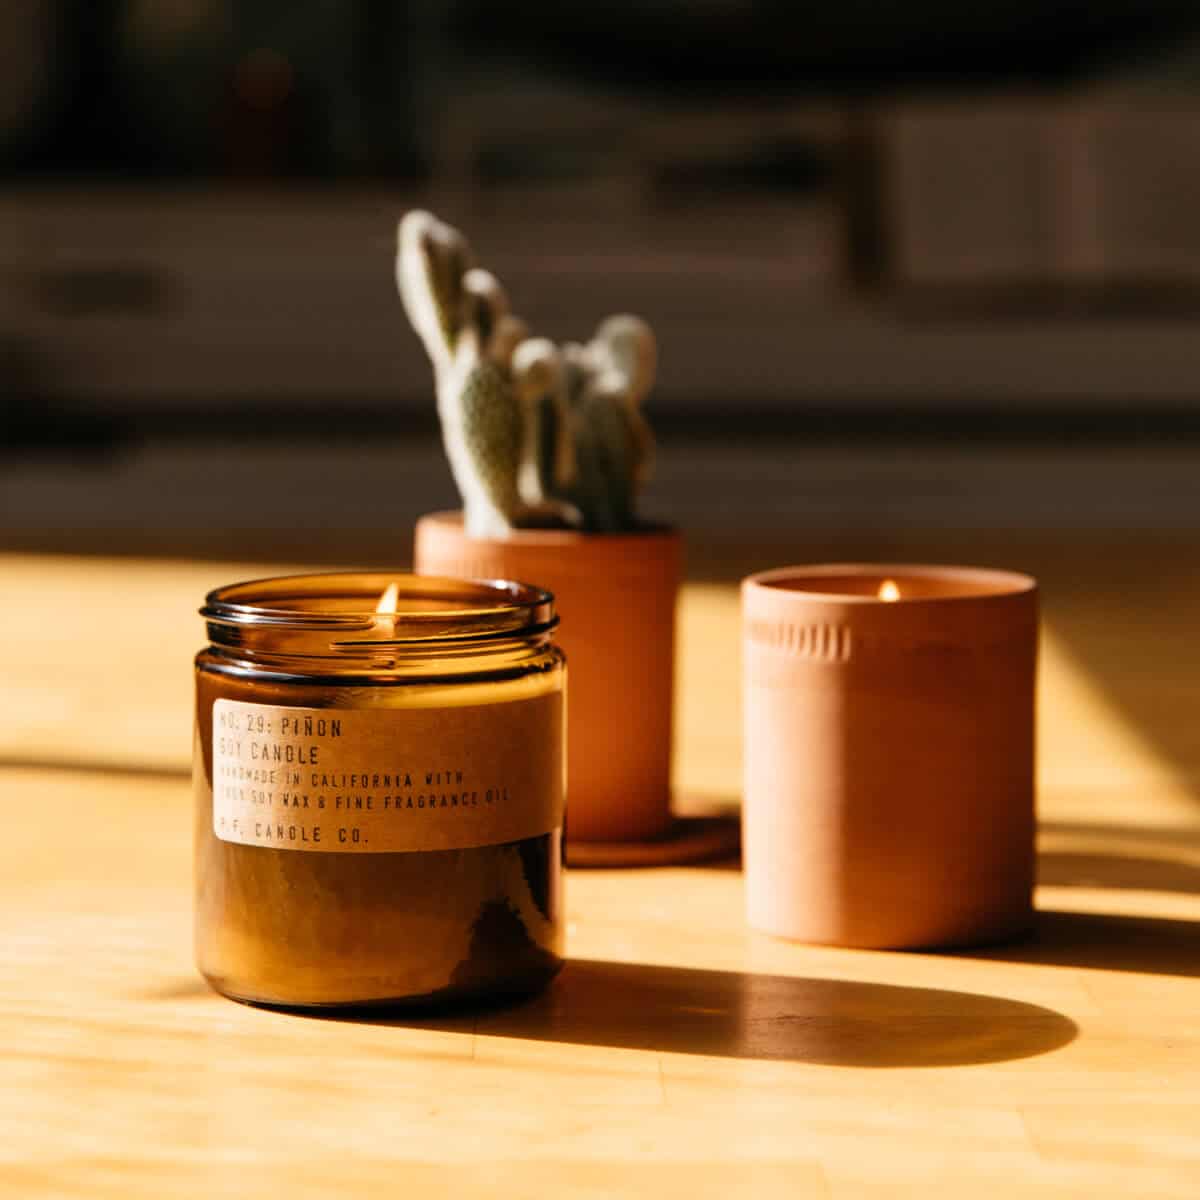 No.29 Piñon Scented Candle by P.F. Candle Co